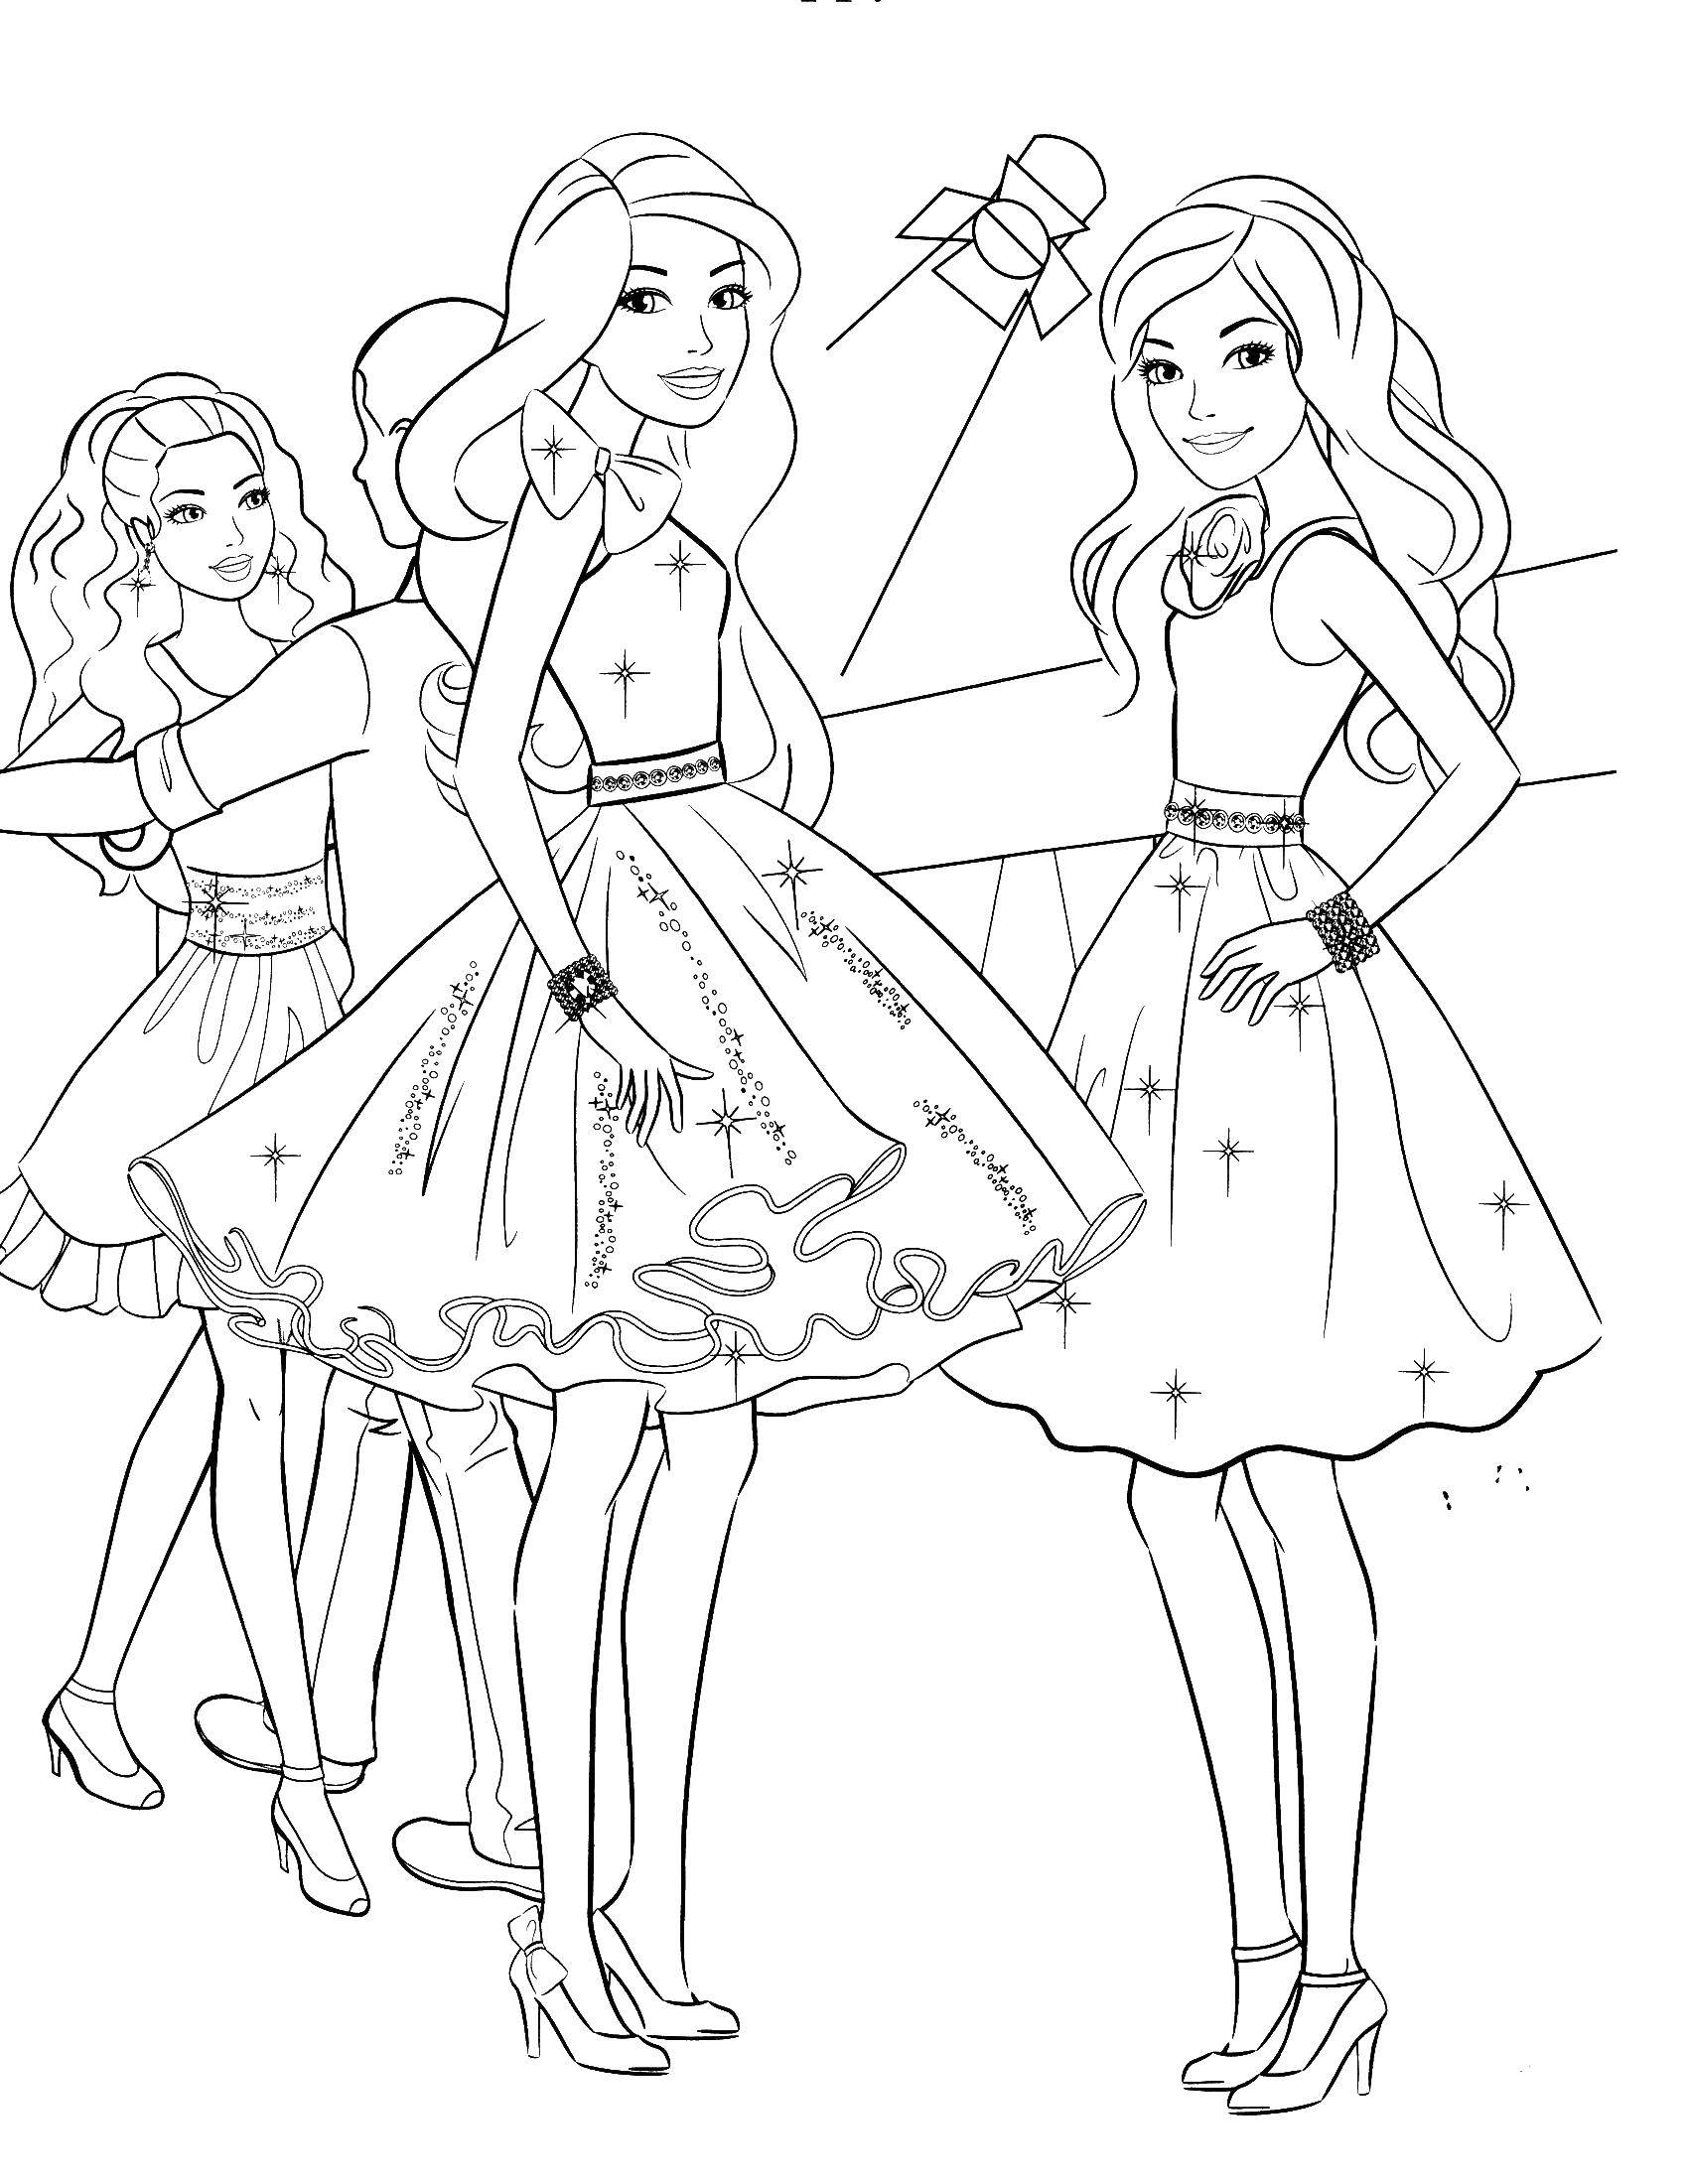 Coloring Barbie at the ball. Category Barbie . Tags:  Barbie , prom.